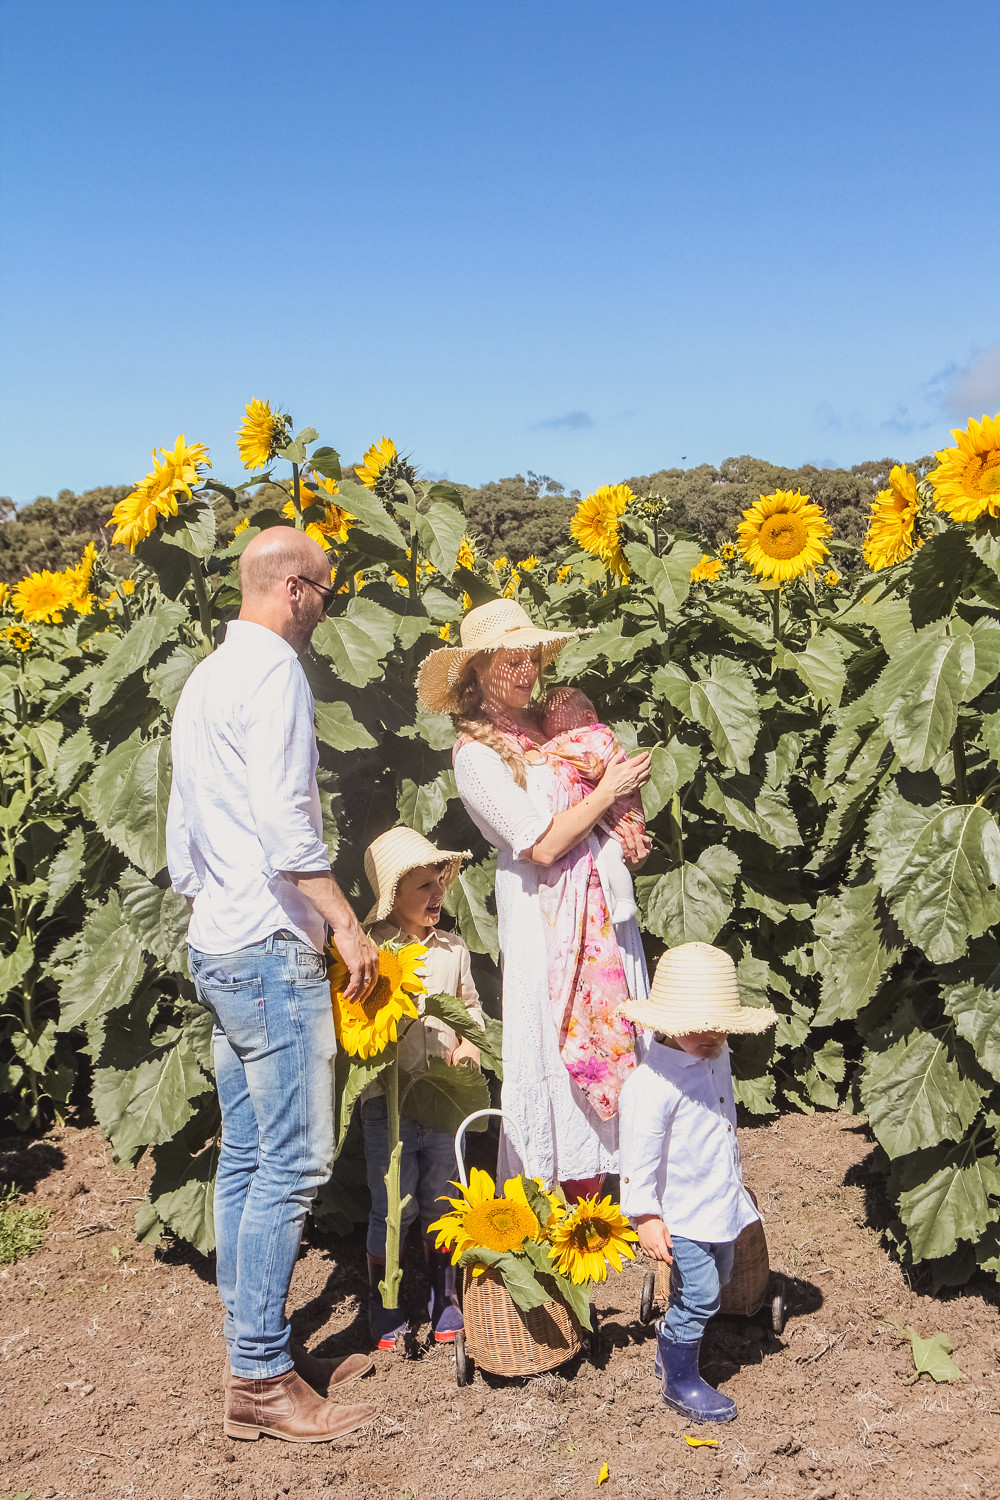 Goldfields Girl and family portrait in sunflower field at pick your own sunflowers near Ballarat Olli Ella leggy filled with sunflowers